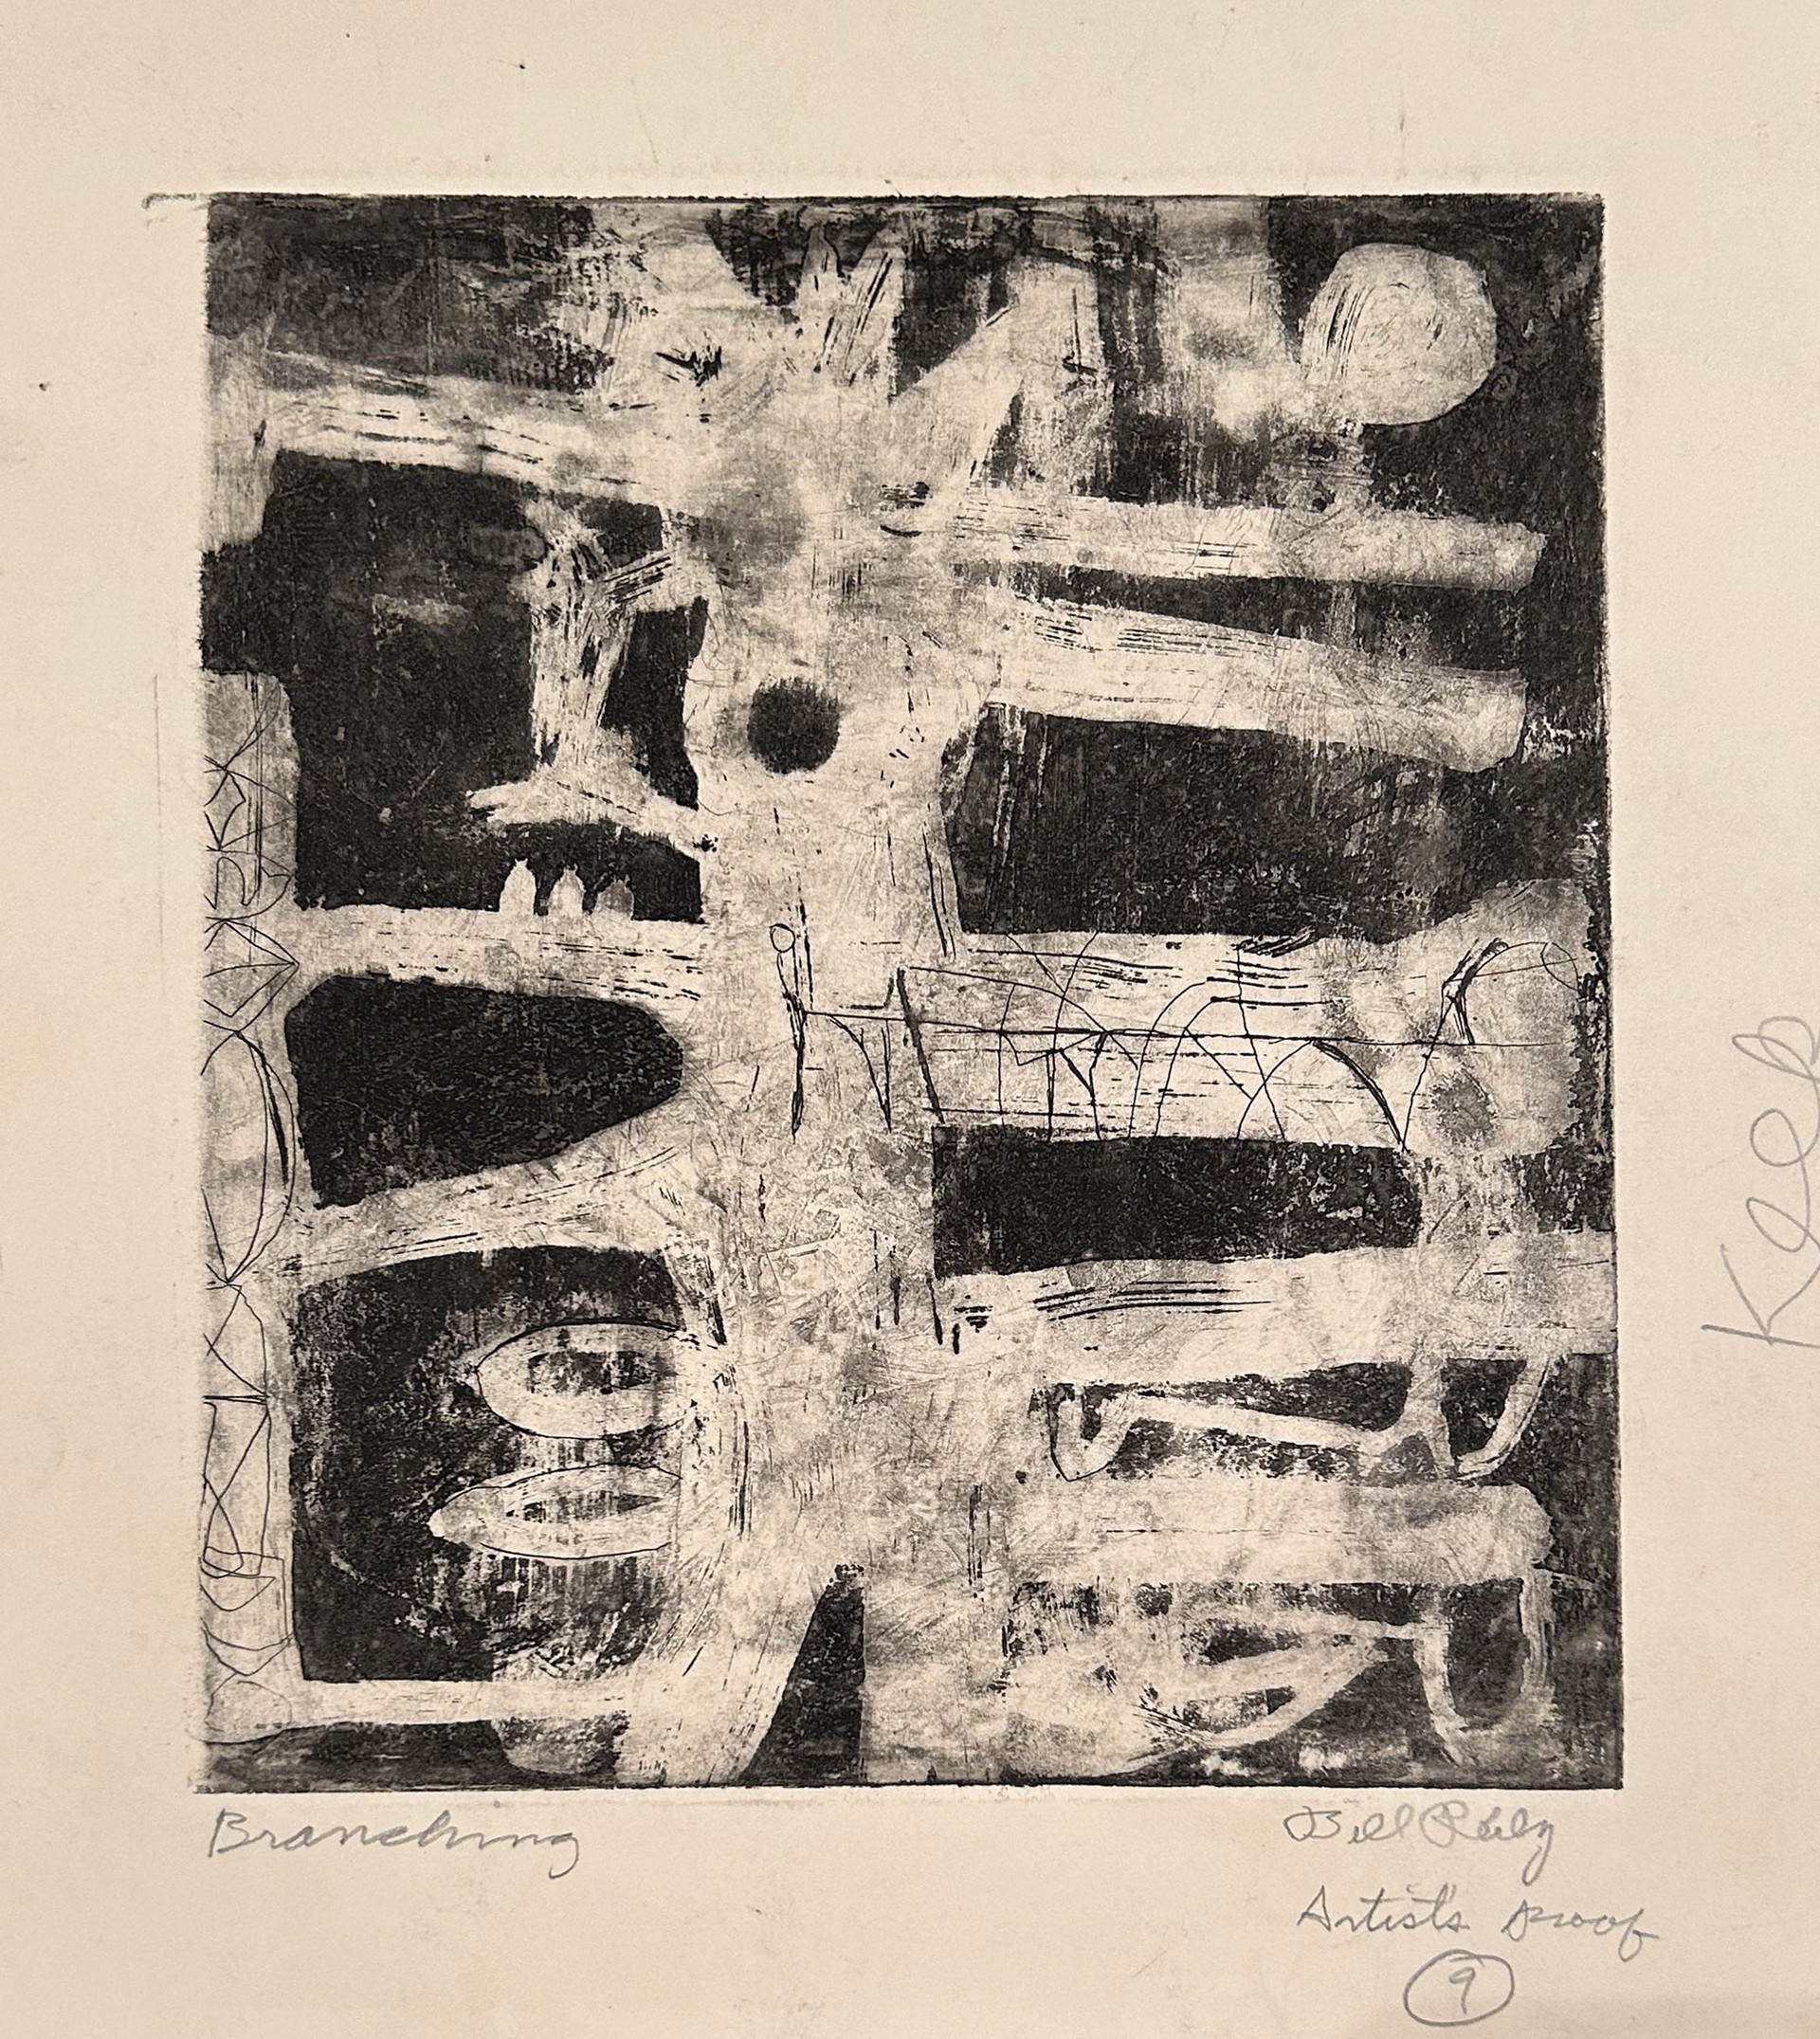 9. Branching (2 prints, including 1 Artist's proof) by Bill Reily Prints